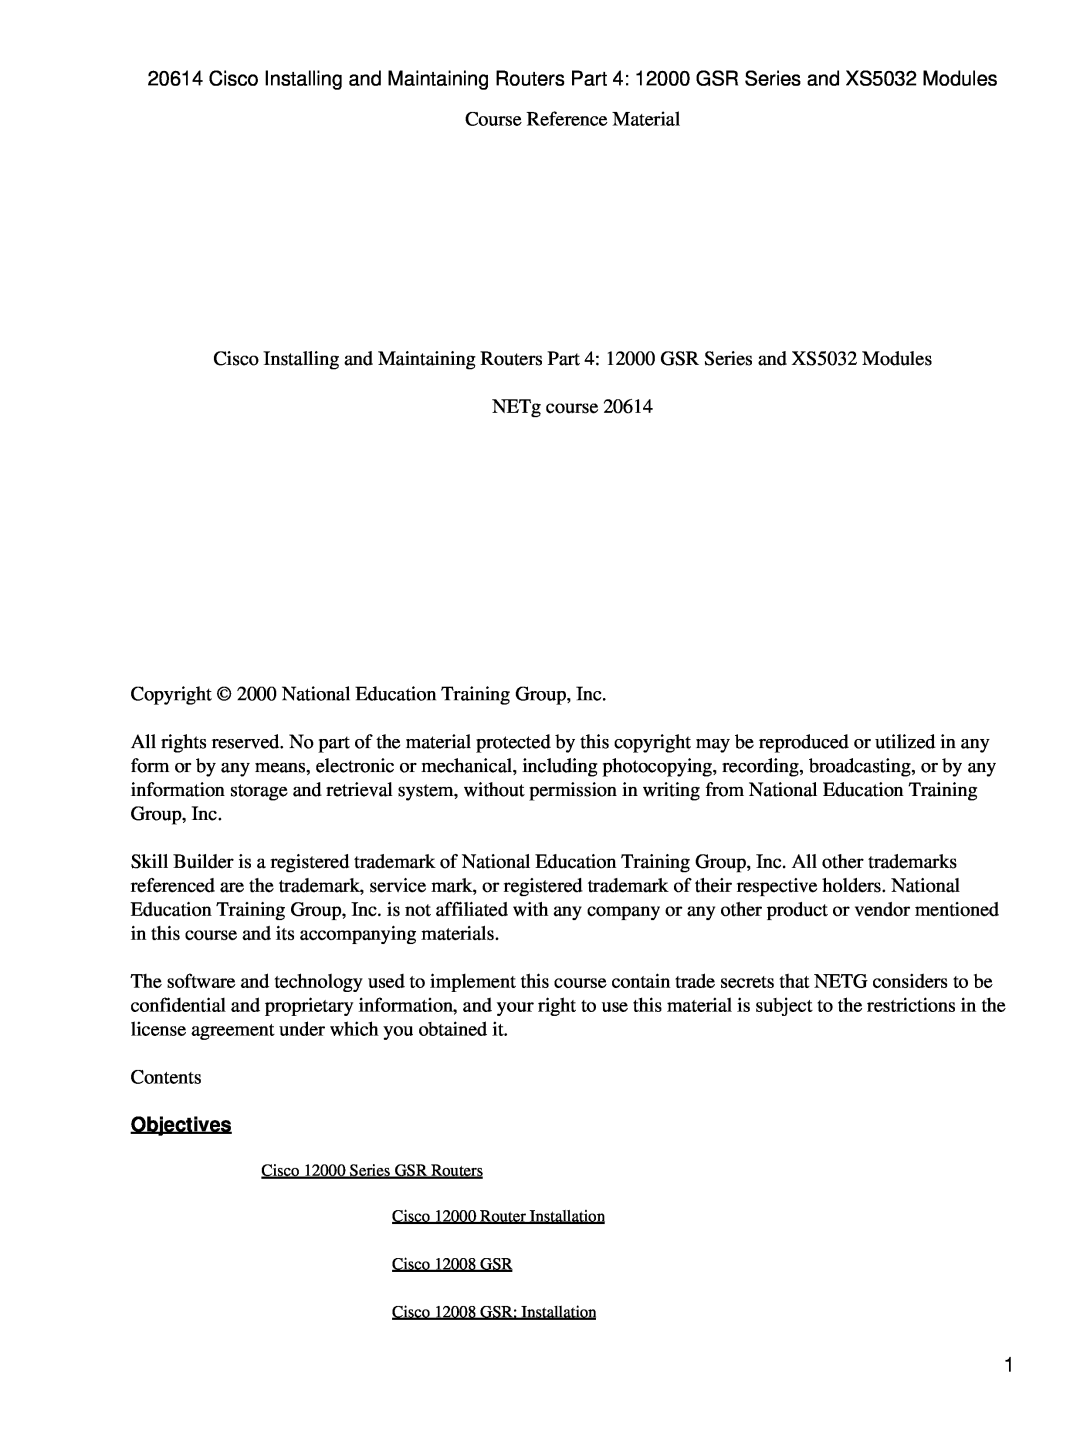 Cisco Systems 12000 GSR, XS5032 manual Objectives 